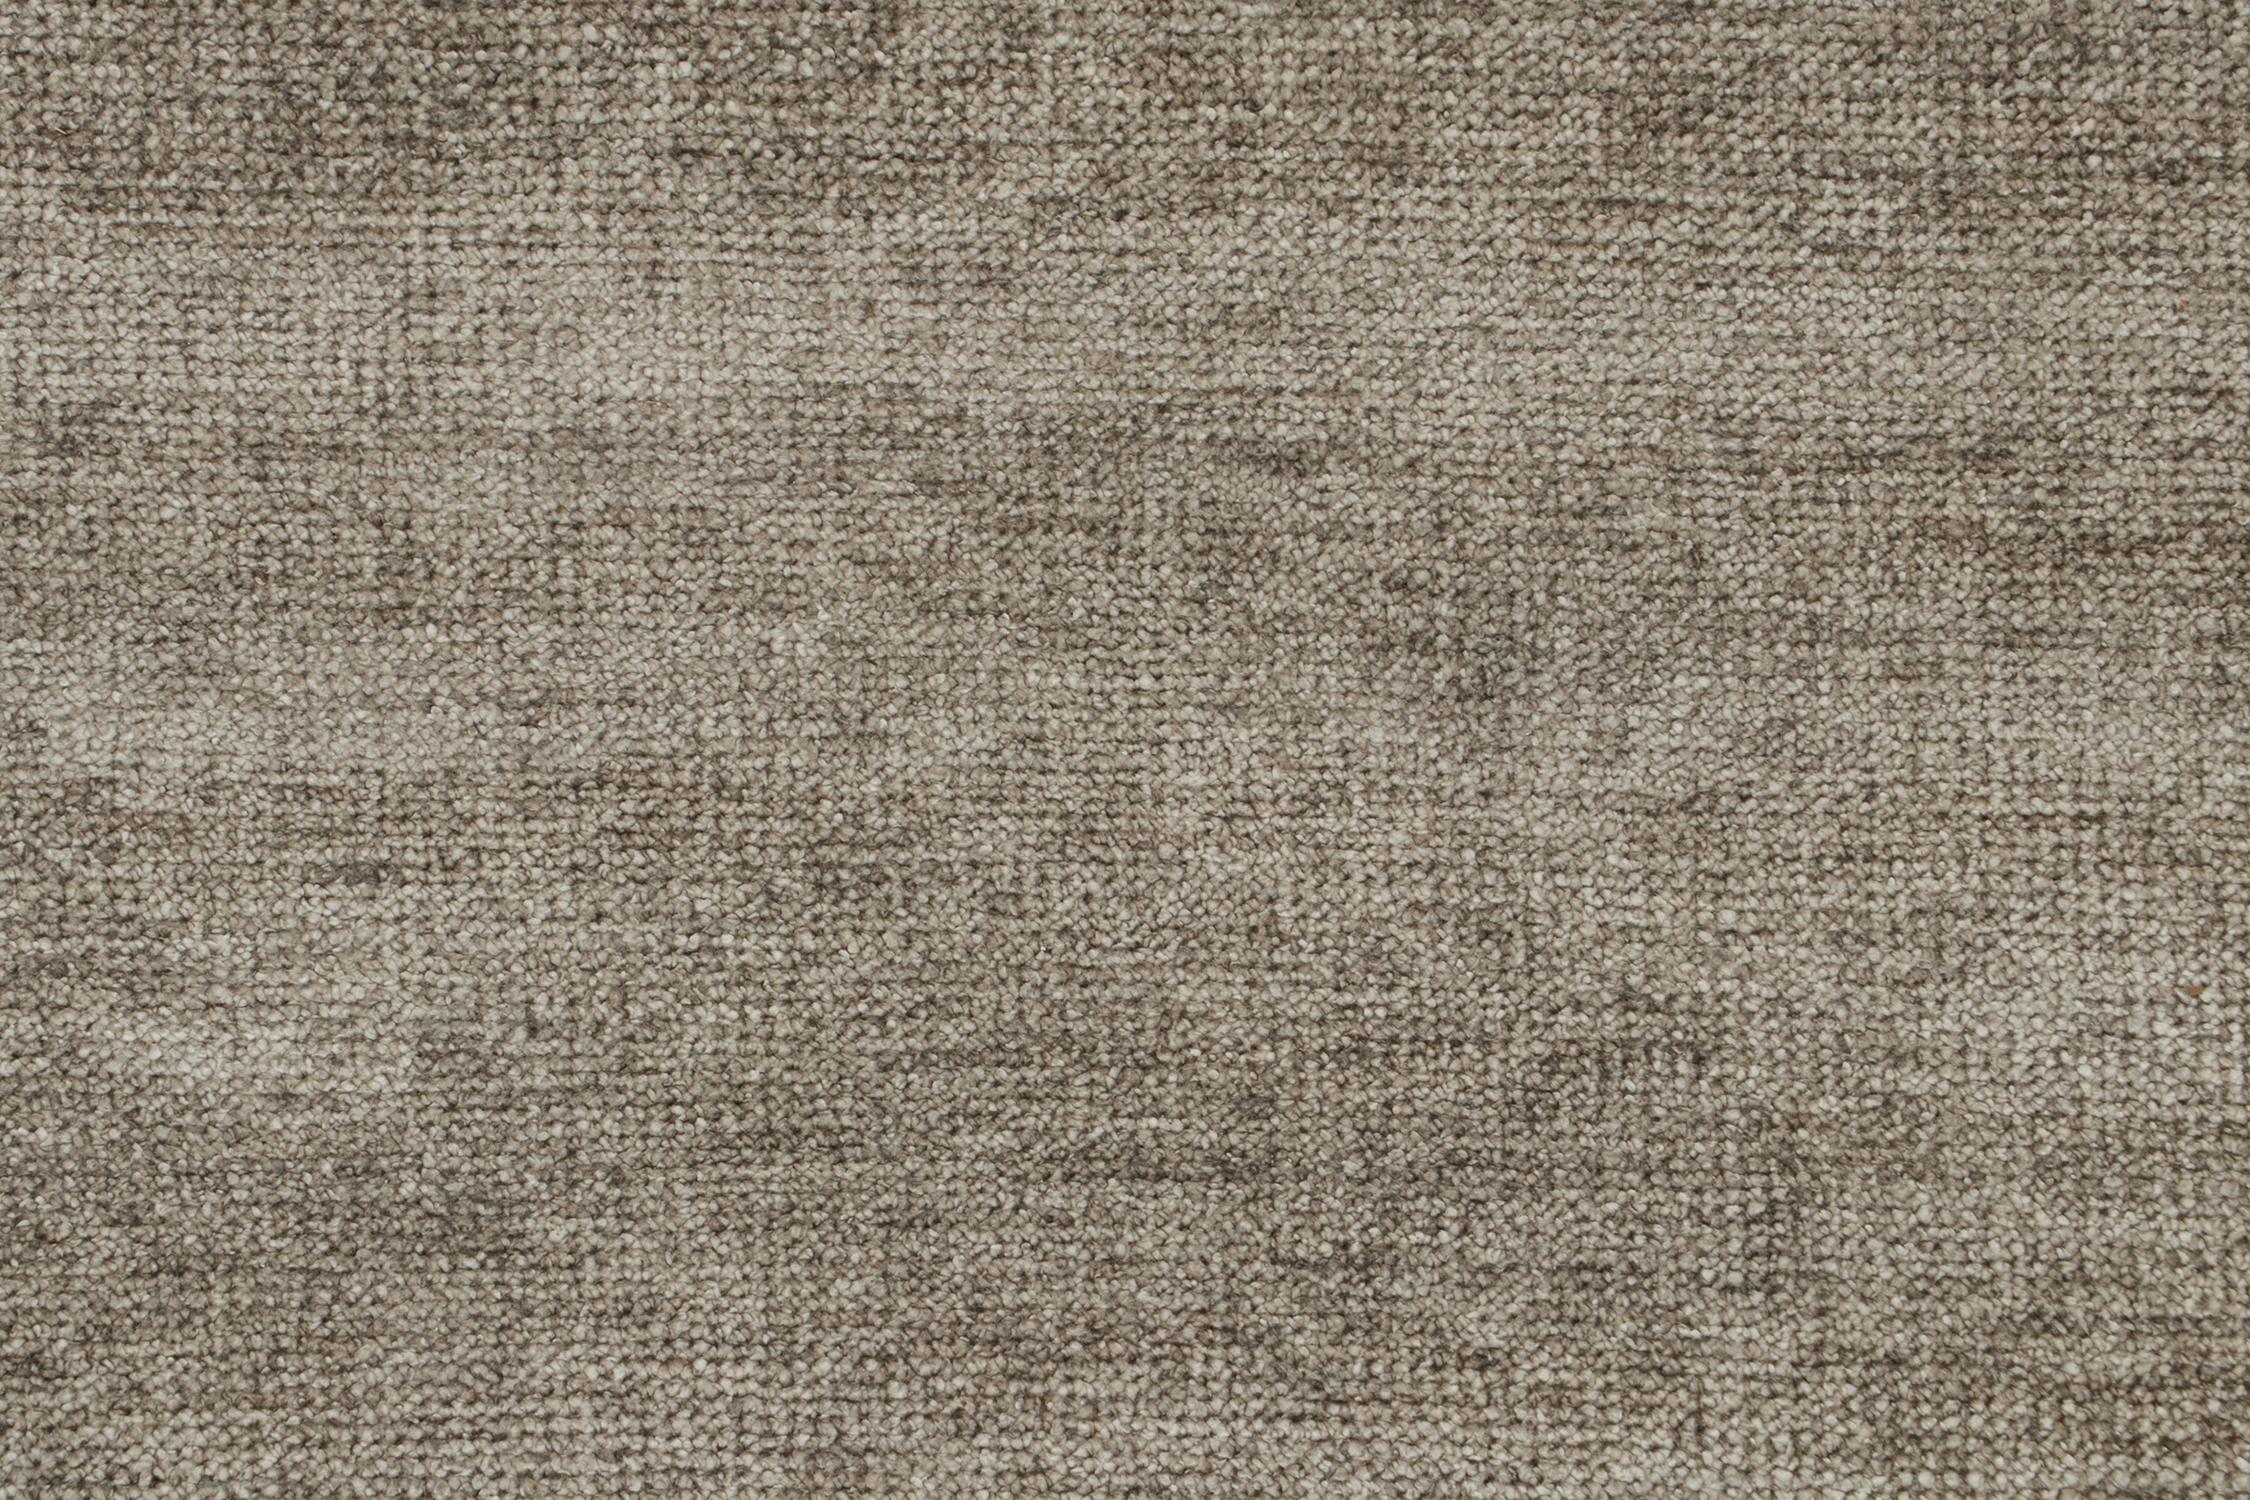 Contemporary Rug & Kilim’s Modern rug in Solid Silver-Gray Tone-on-Tone Striae For Sale